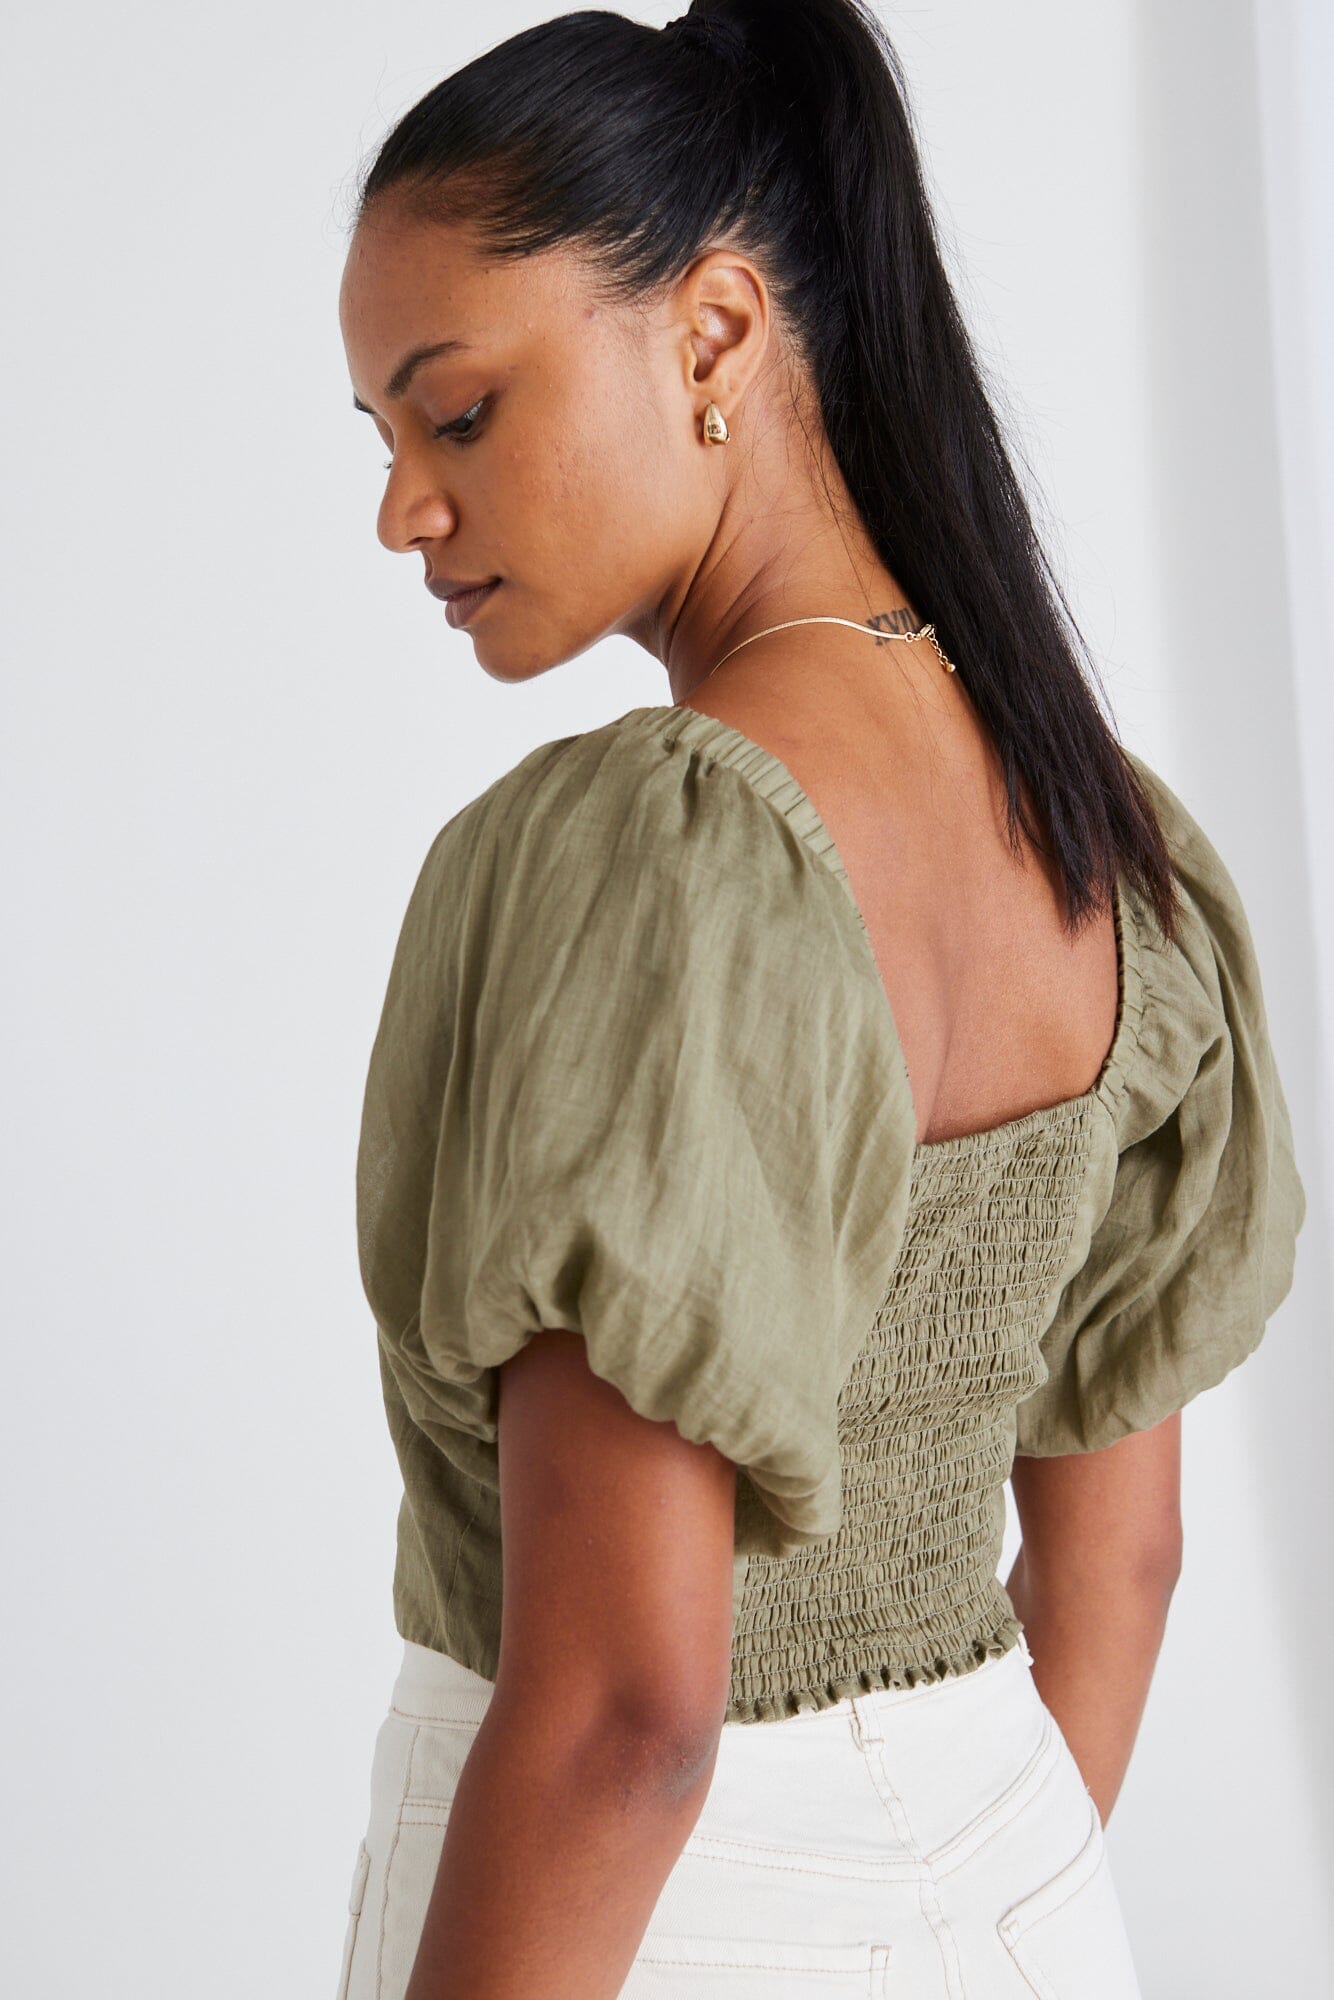 IVY + JACK - Lily Top - Light Khaki *** PRE ORDER / DUE APPROX 23FEB *** Womens IVY + JACK